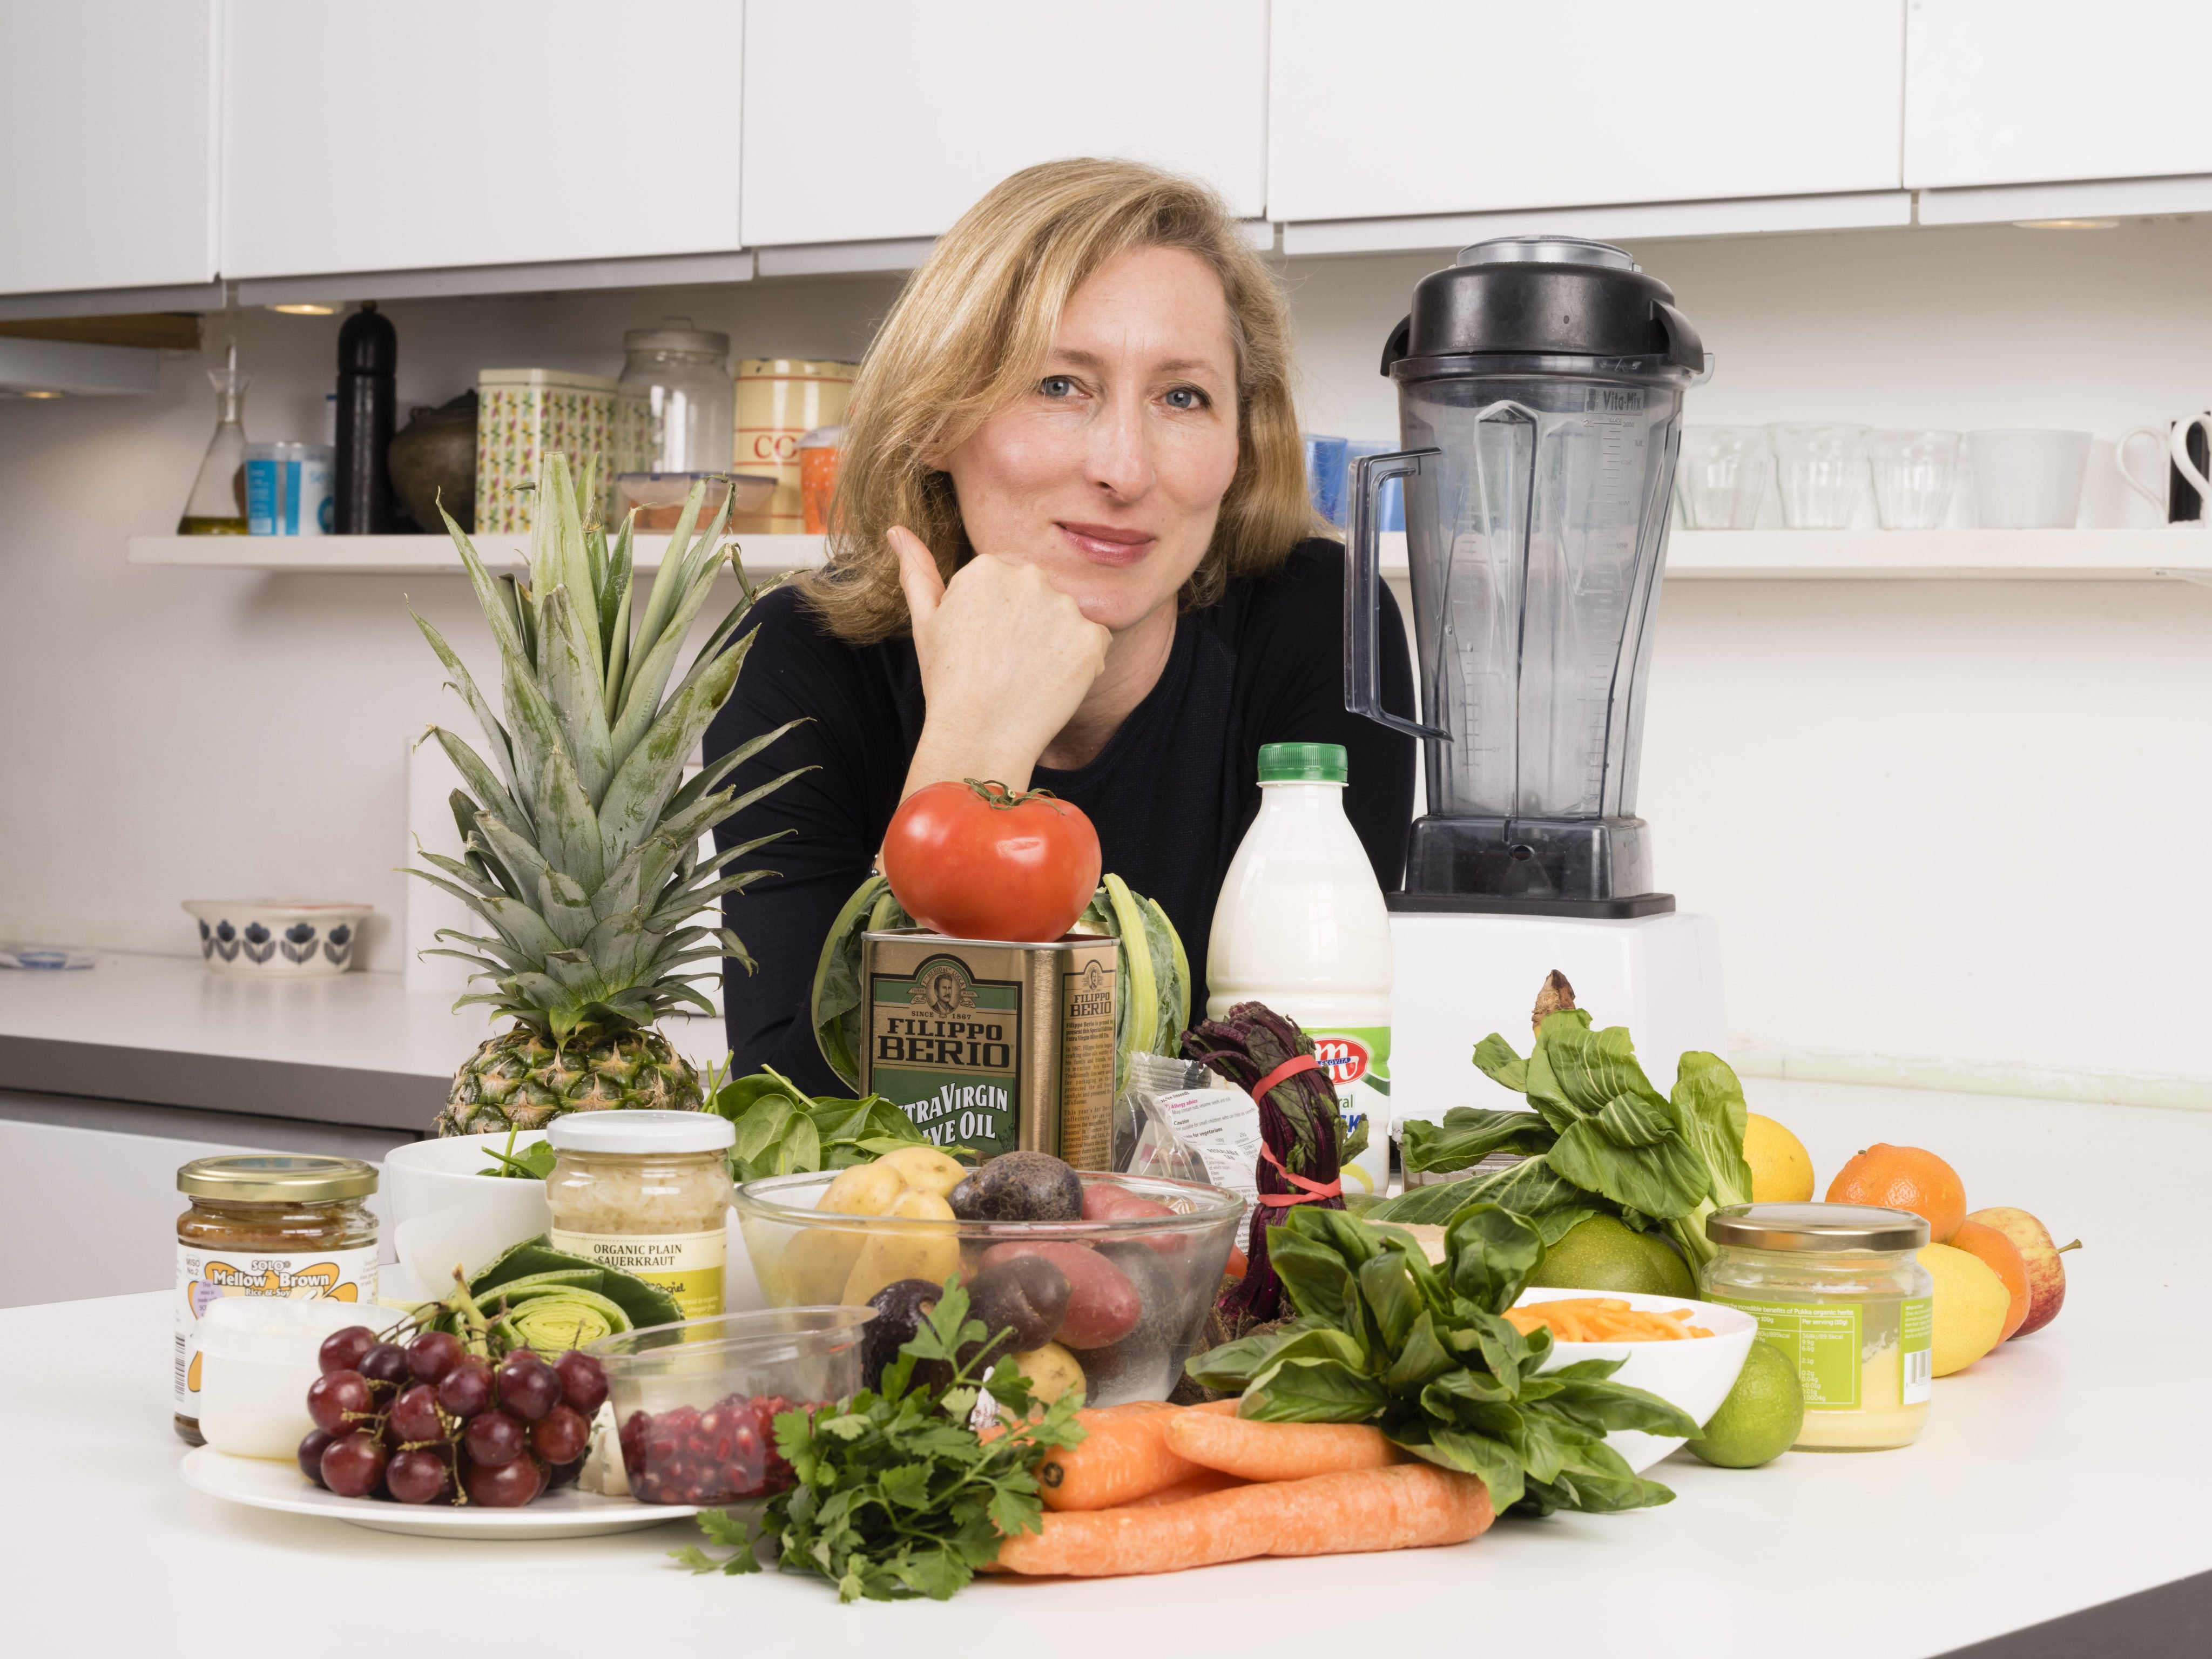 UK-based nutritional therapist and author of The Gut Makeover Jeannette Hyde, has just published The 10-Hour Diet that explains the weight-loss benefits of intermittent fasting. Photo: Andrew Crowley